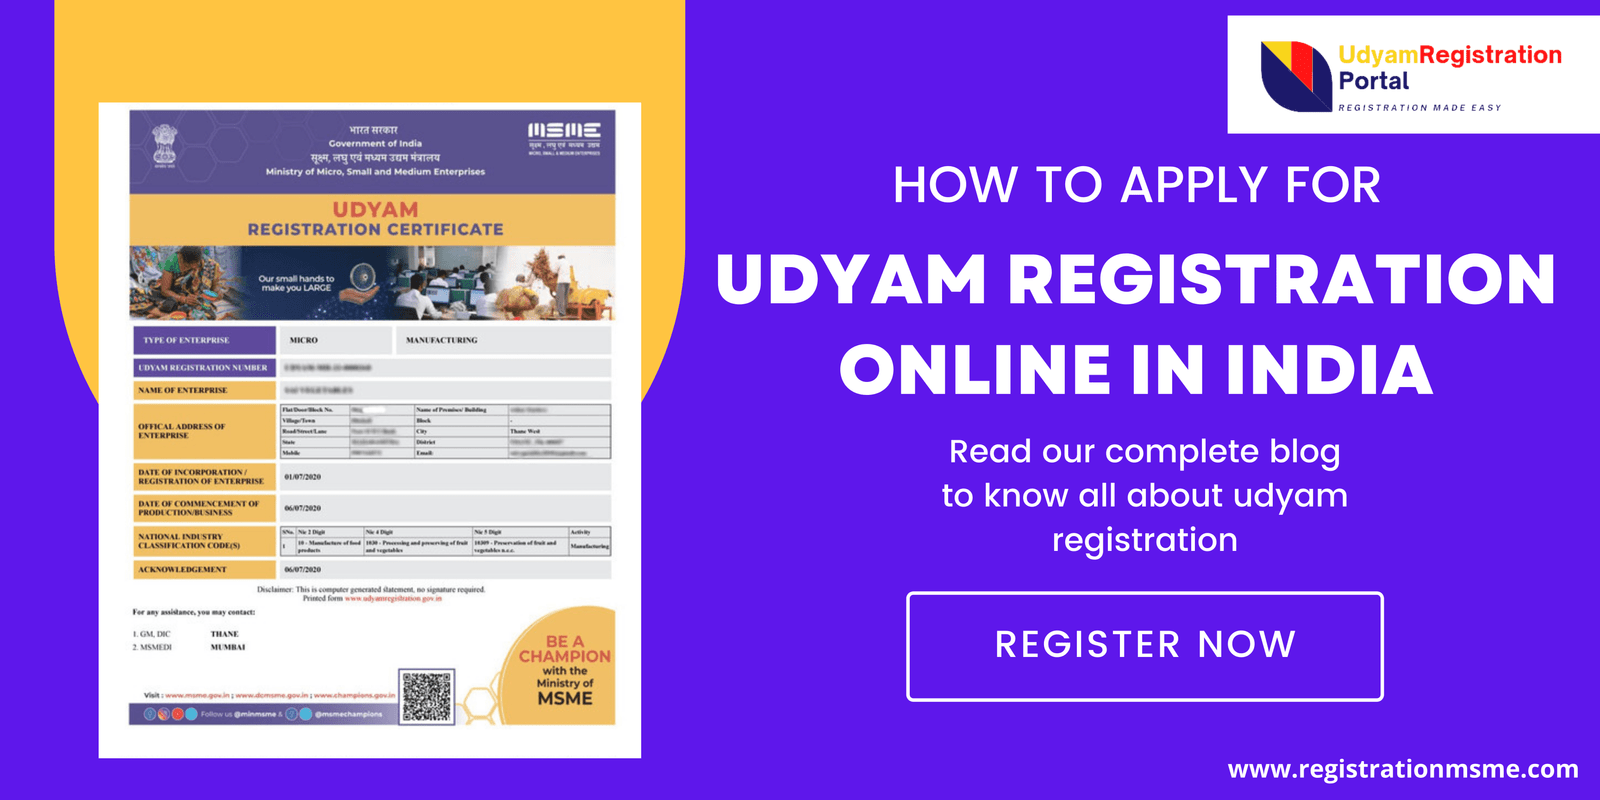 How to Apply for Udyam Registration Online in India?